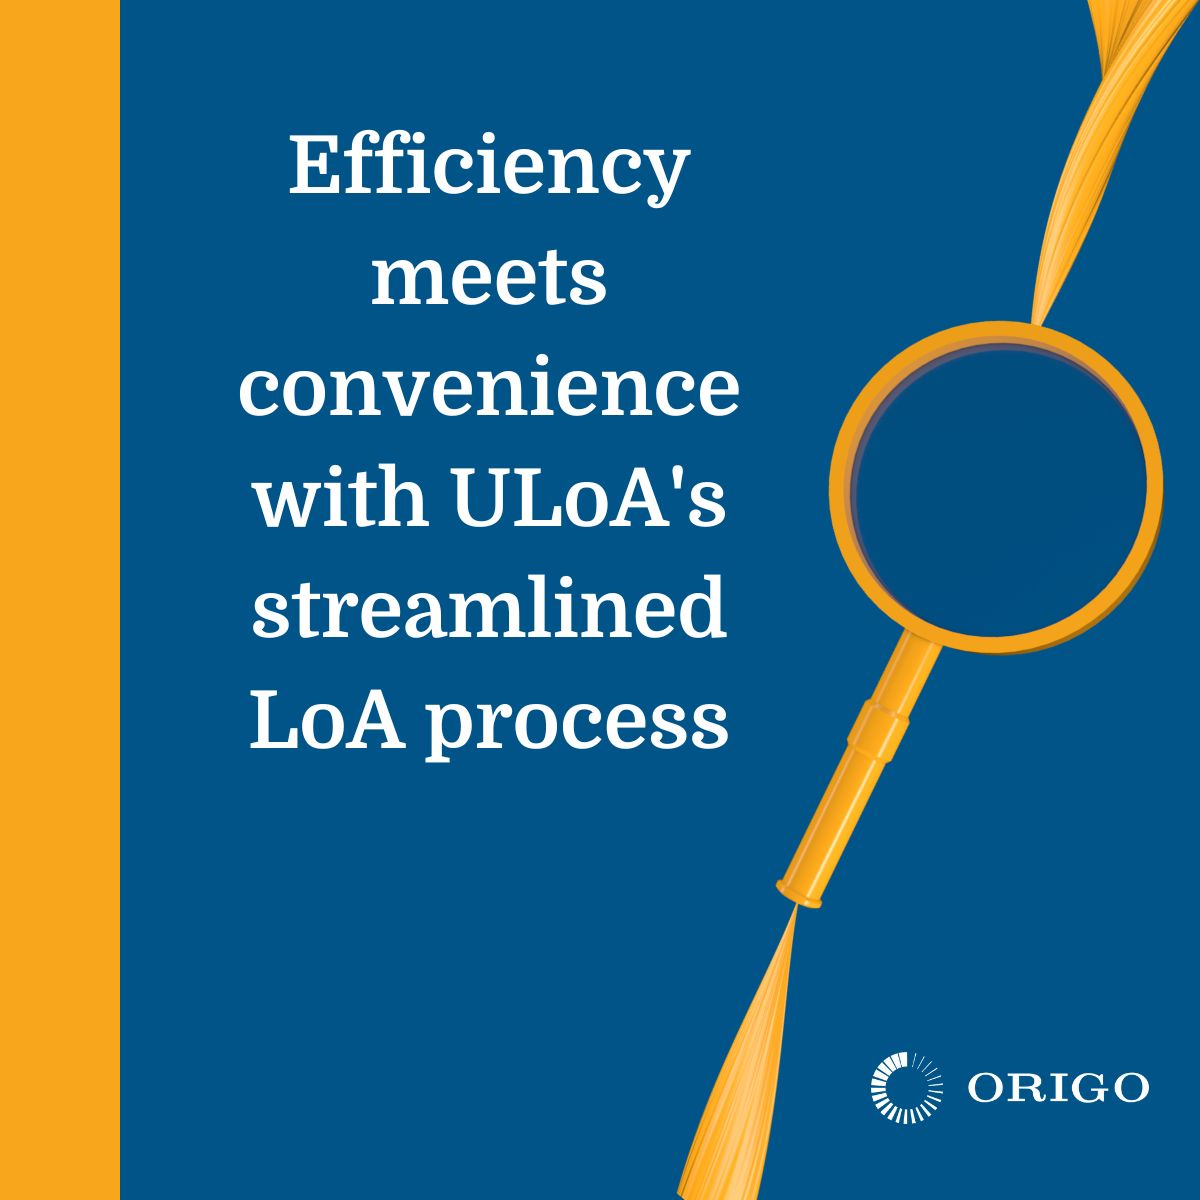 Consistency is key, are you seeking a streamlined LoA process? ULoA offers real-time updates, eliminating the need for constant follow-ups. Let's enhance client experiences together. #FinancialPlanning #ClientOnboarding

More information here eu1.hubs.ly/H08n0640